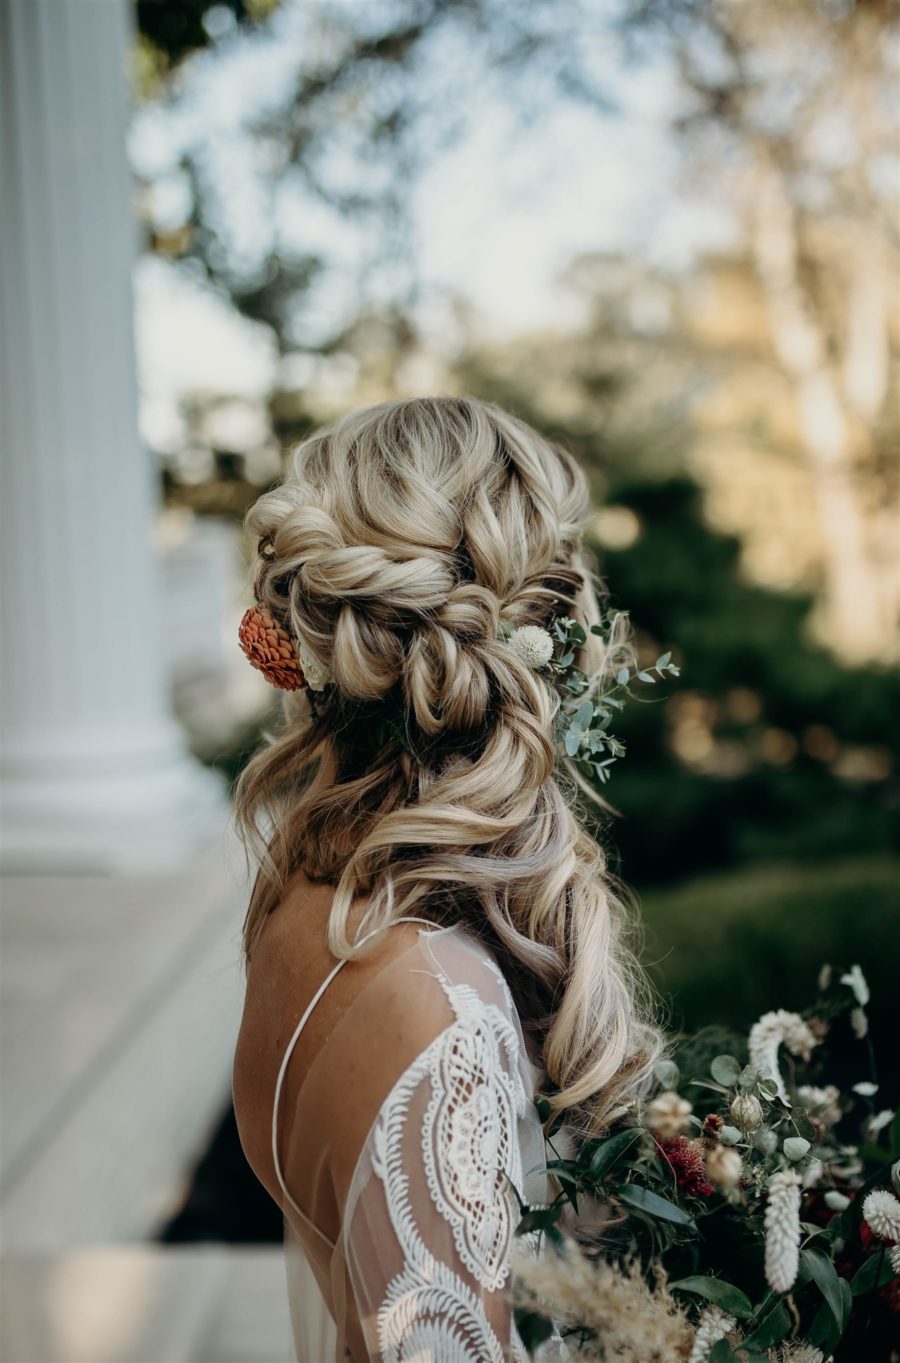 Boho bridal braid for Boho Winter Wedding Styled Shoot by Riley Gardner Photography featured on Nashville Bride Guide